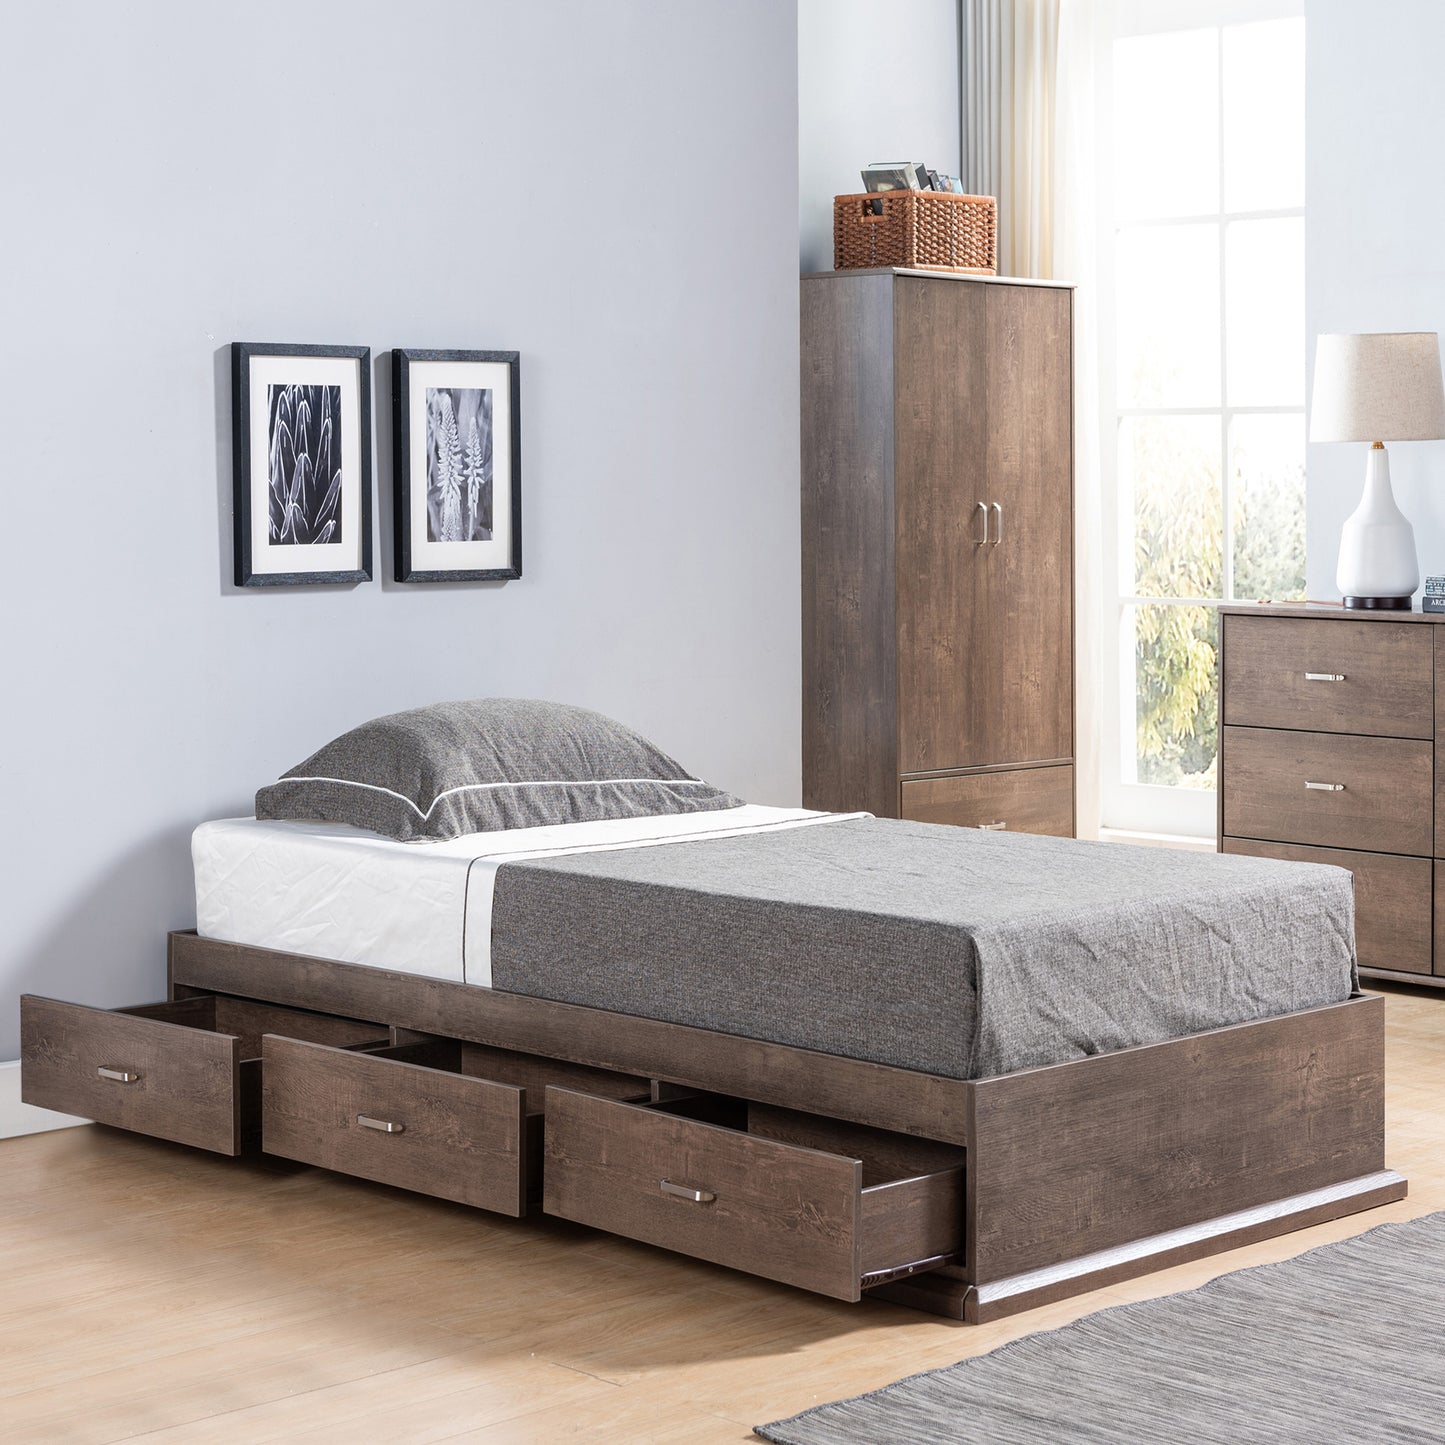 Right angled contemporary walnut three-drawer platform storage bed with drawers open in a bedroom with accessories